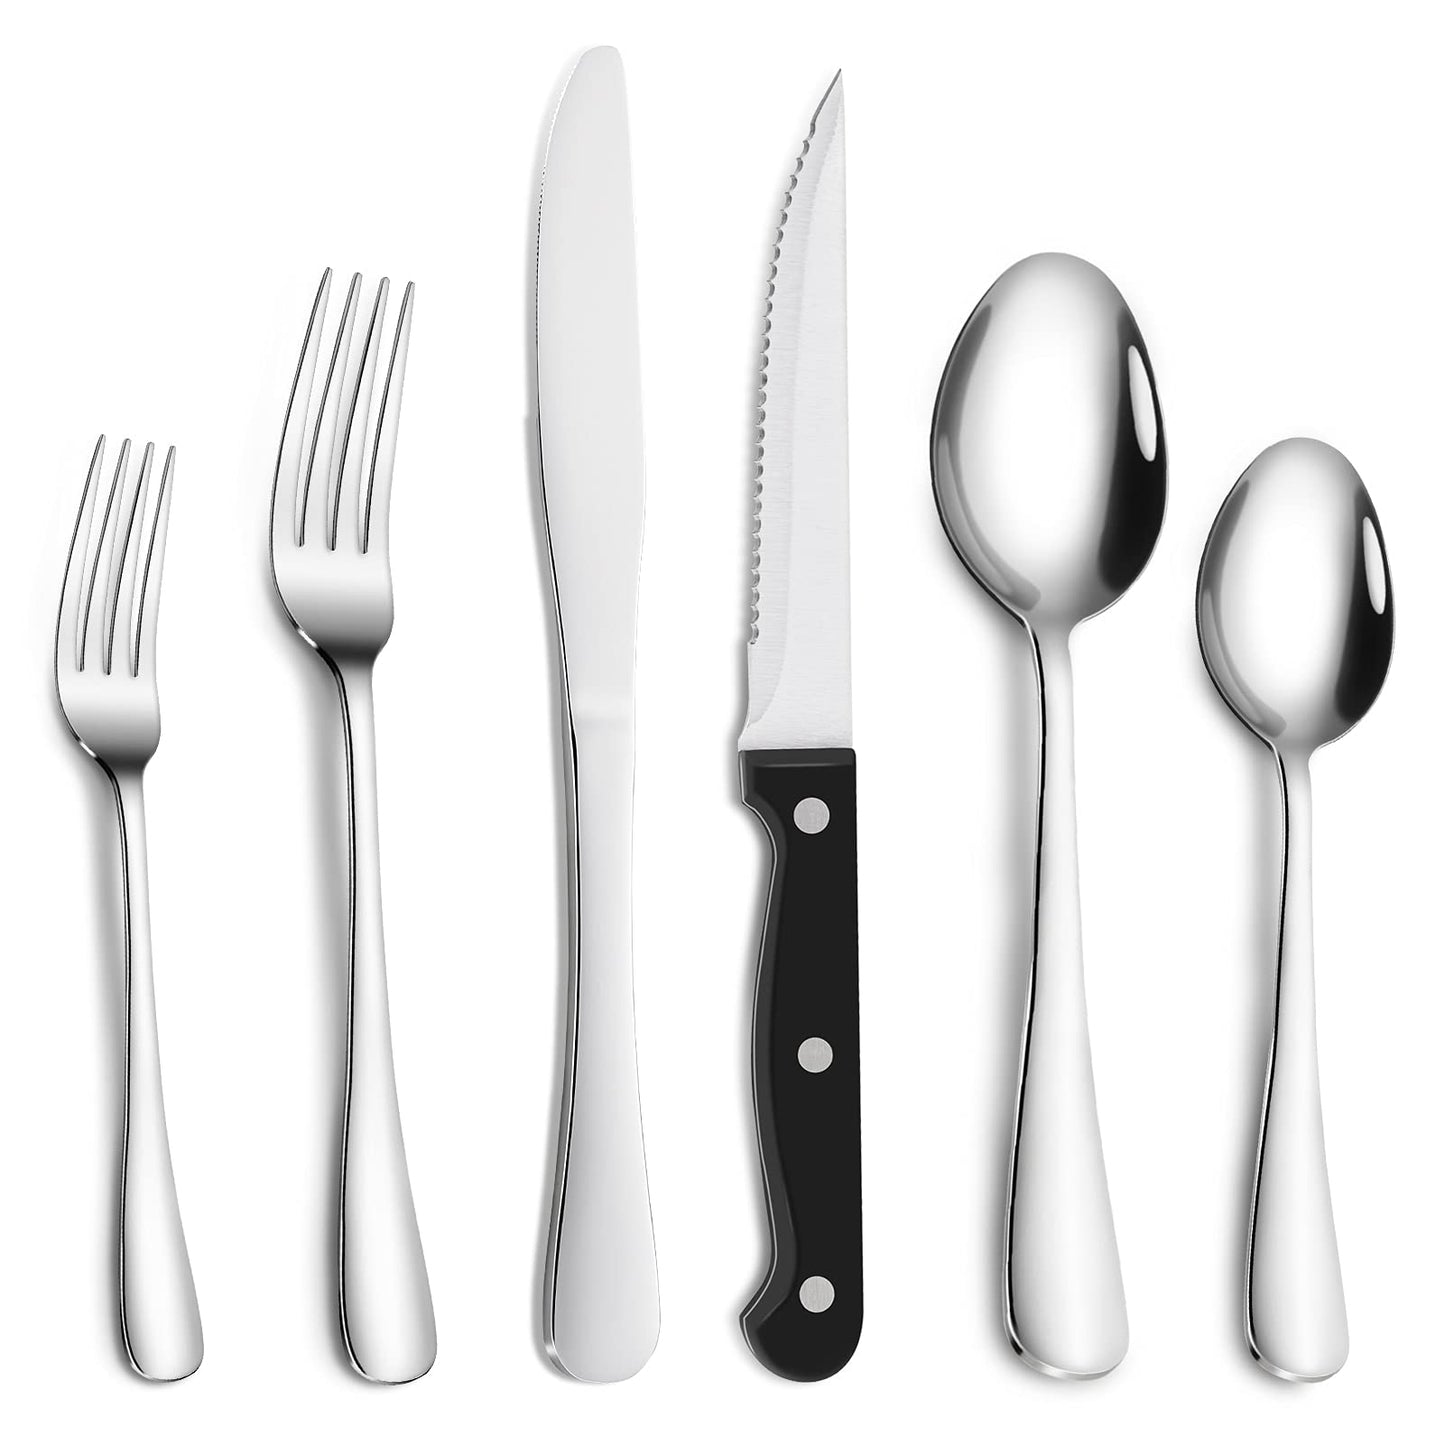 CIBEAT 36 Piece S592 Stainless Steel Silverware Set with Steak Knives